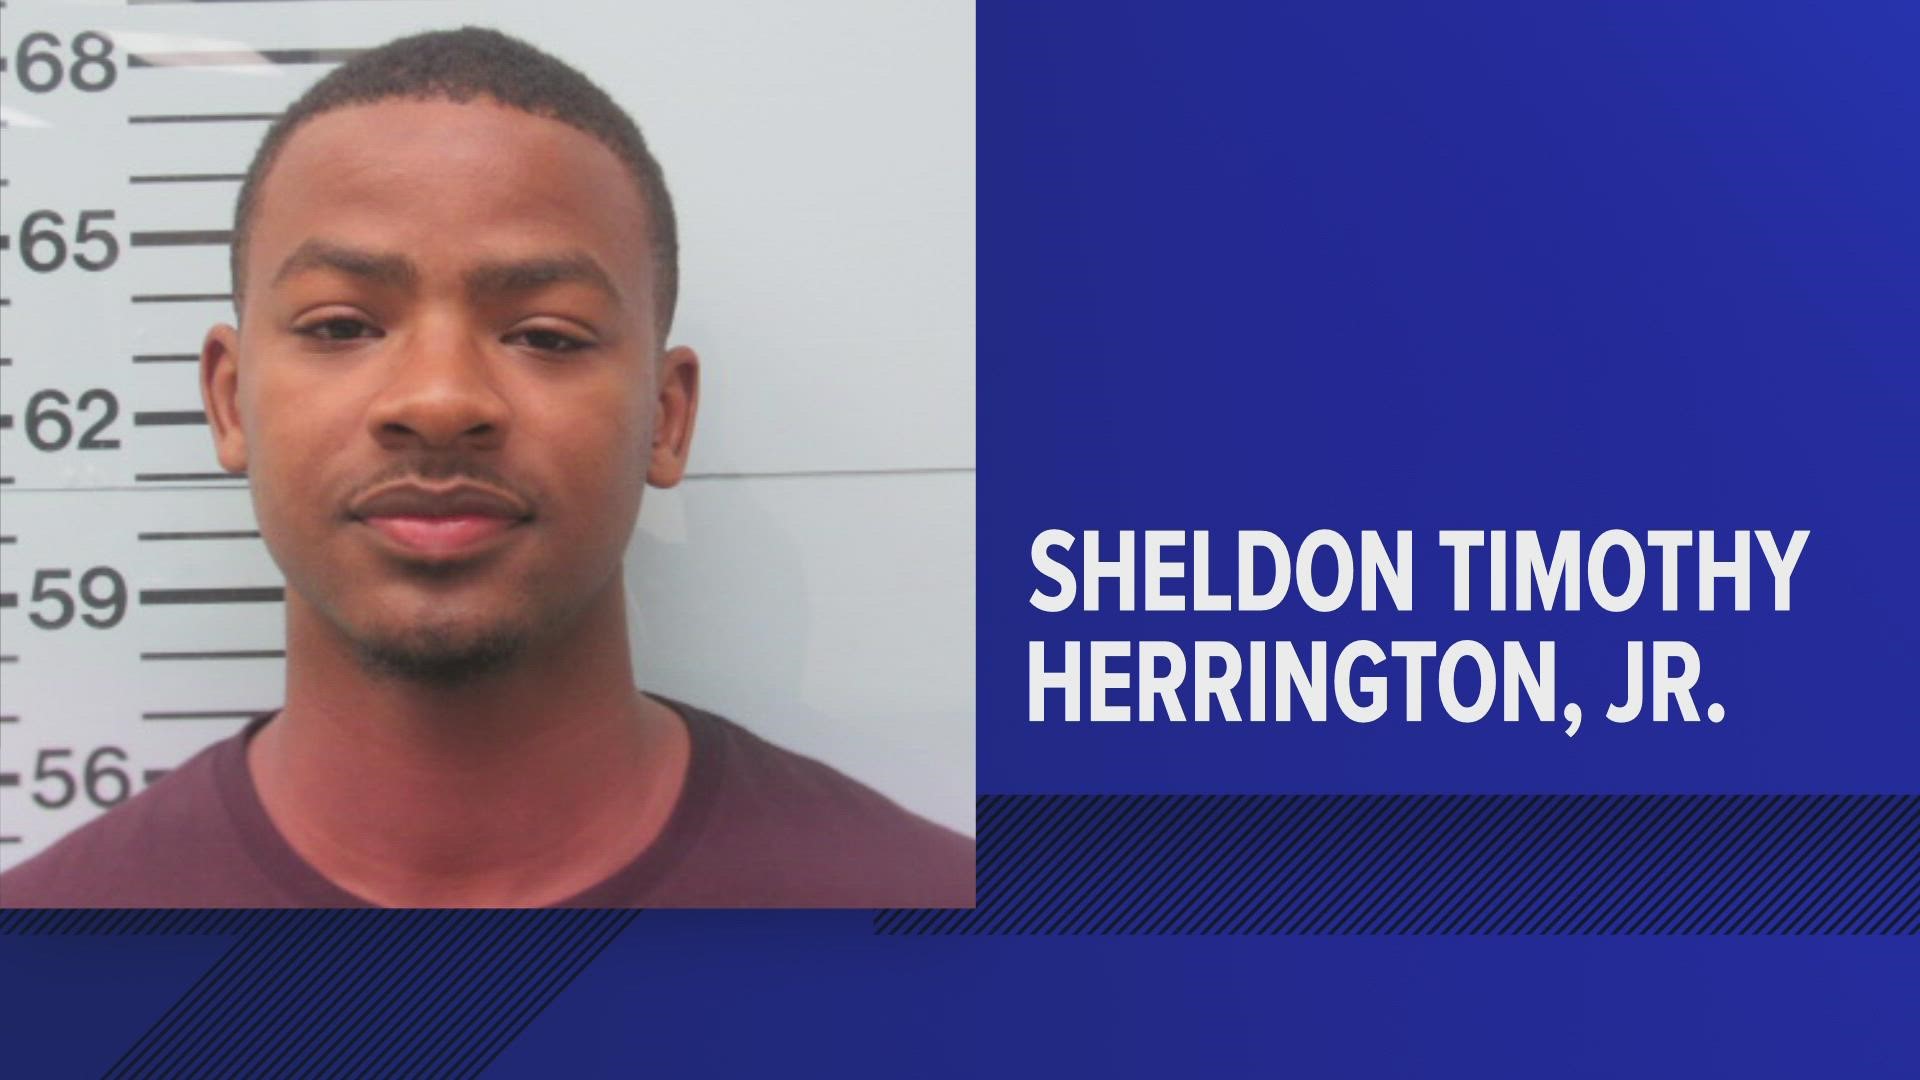 Sheldon Timothy Herrington Jr., accused of Lee's murder, is out on bond one month after filing a wrongful imprisonment lawsuit, court records show.